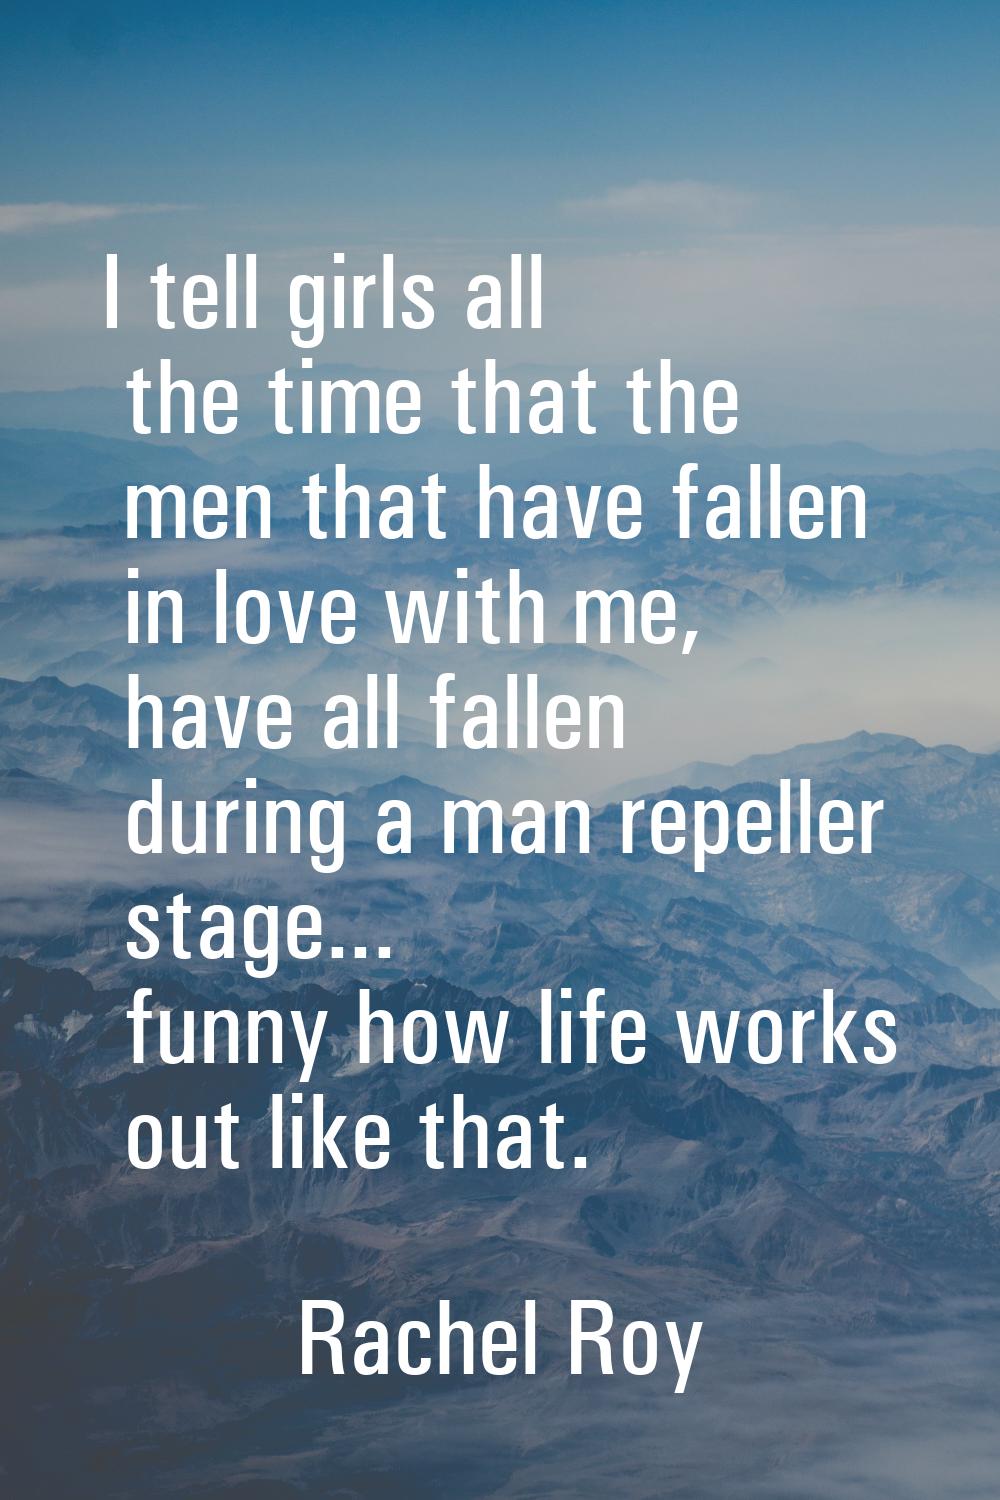 I tell girls all the time that the men that have fallen in love with me, have all fallen during a m